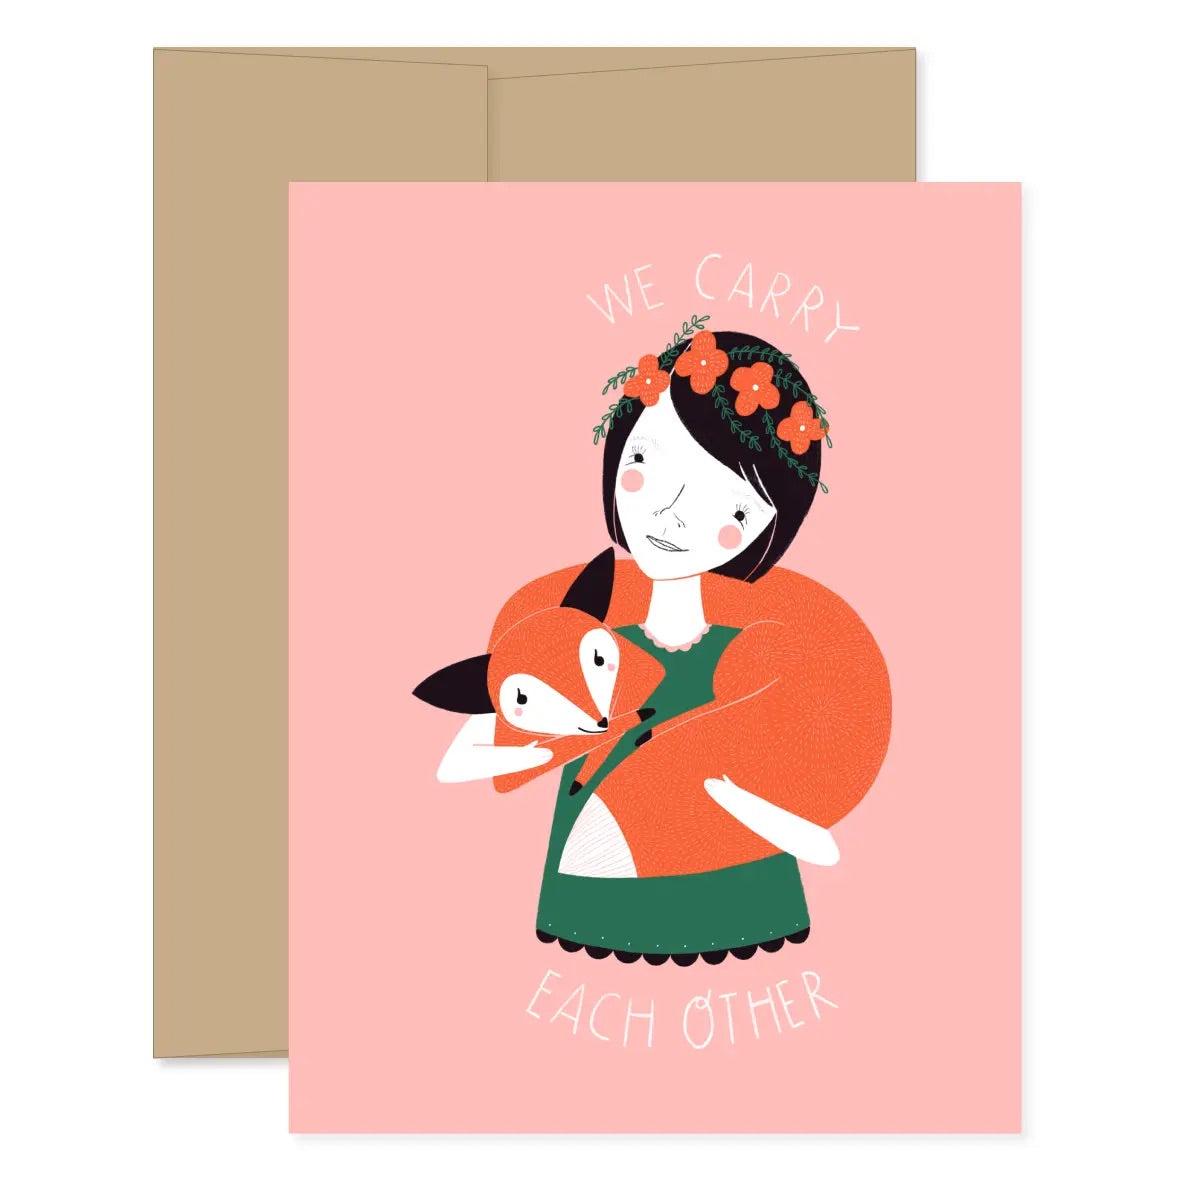 Pink card with person holding fox. White text reads "we carry each other"